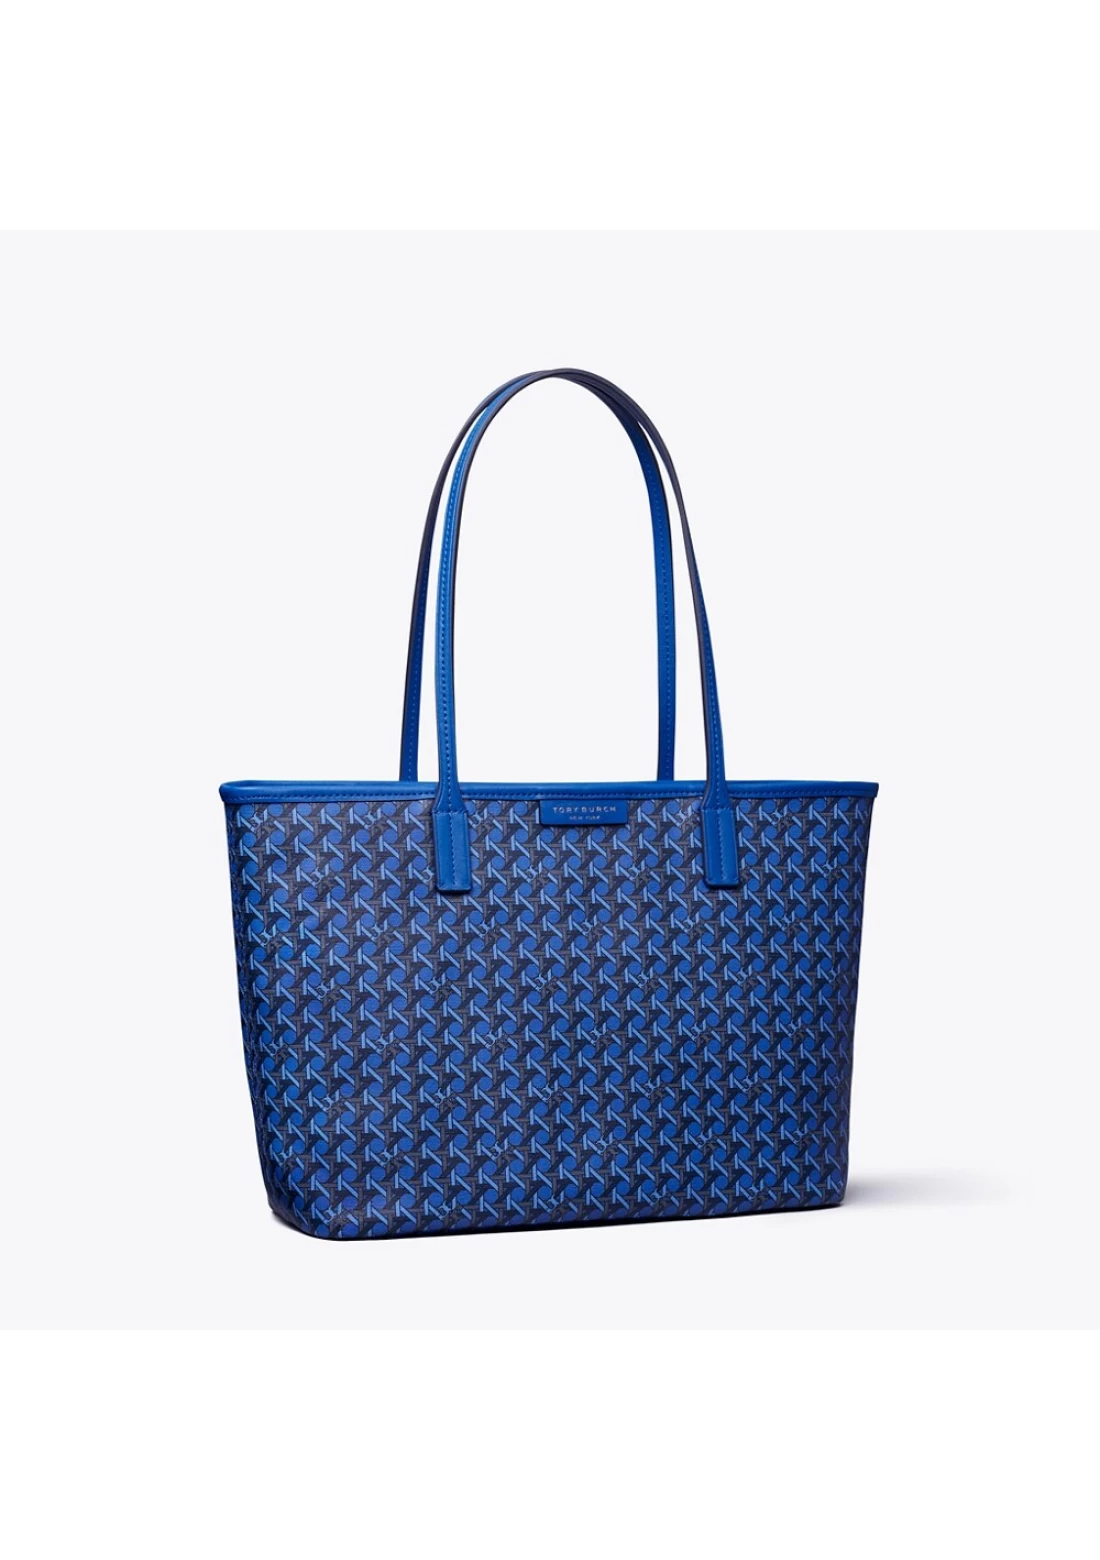 3 reasons to love the Ever-Ready Tote - Tory Burch